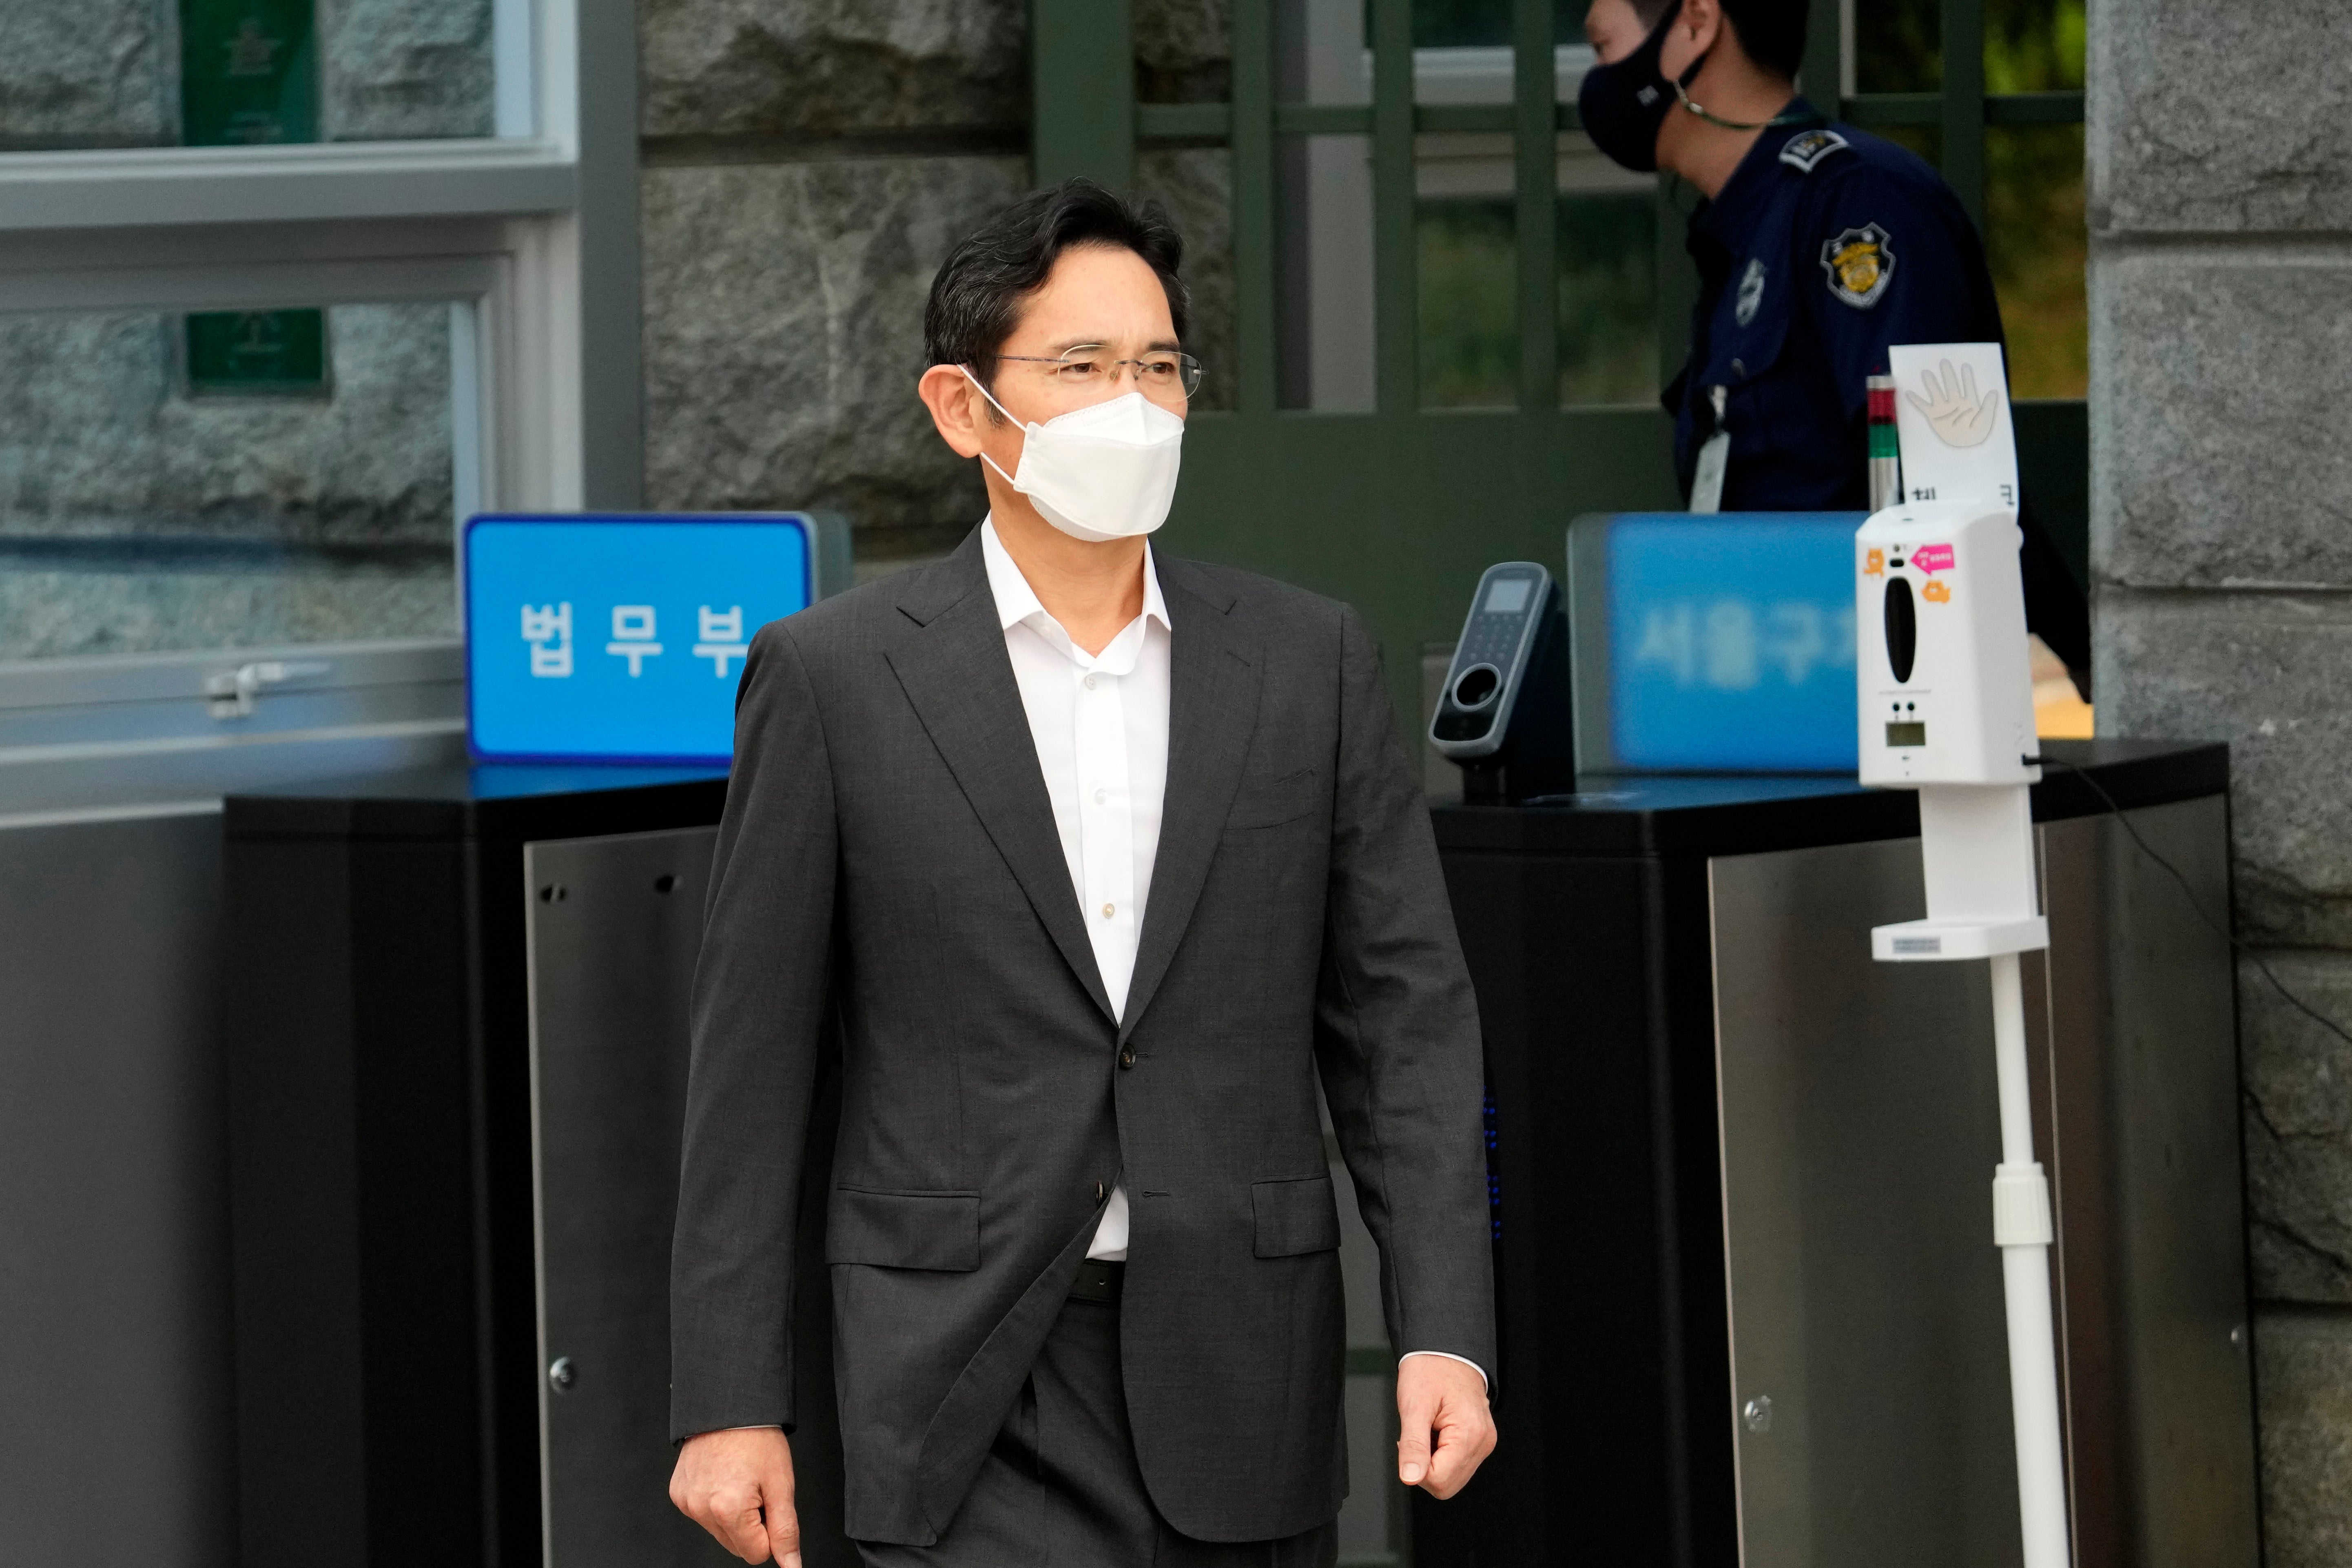 File: Samsung legal heir Lee Jae-yong has been convicted and fined for using sedative propofol